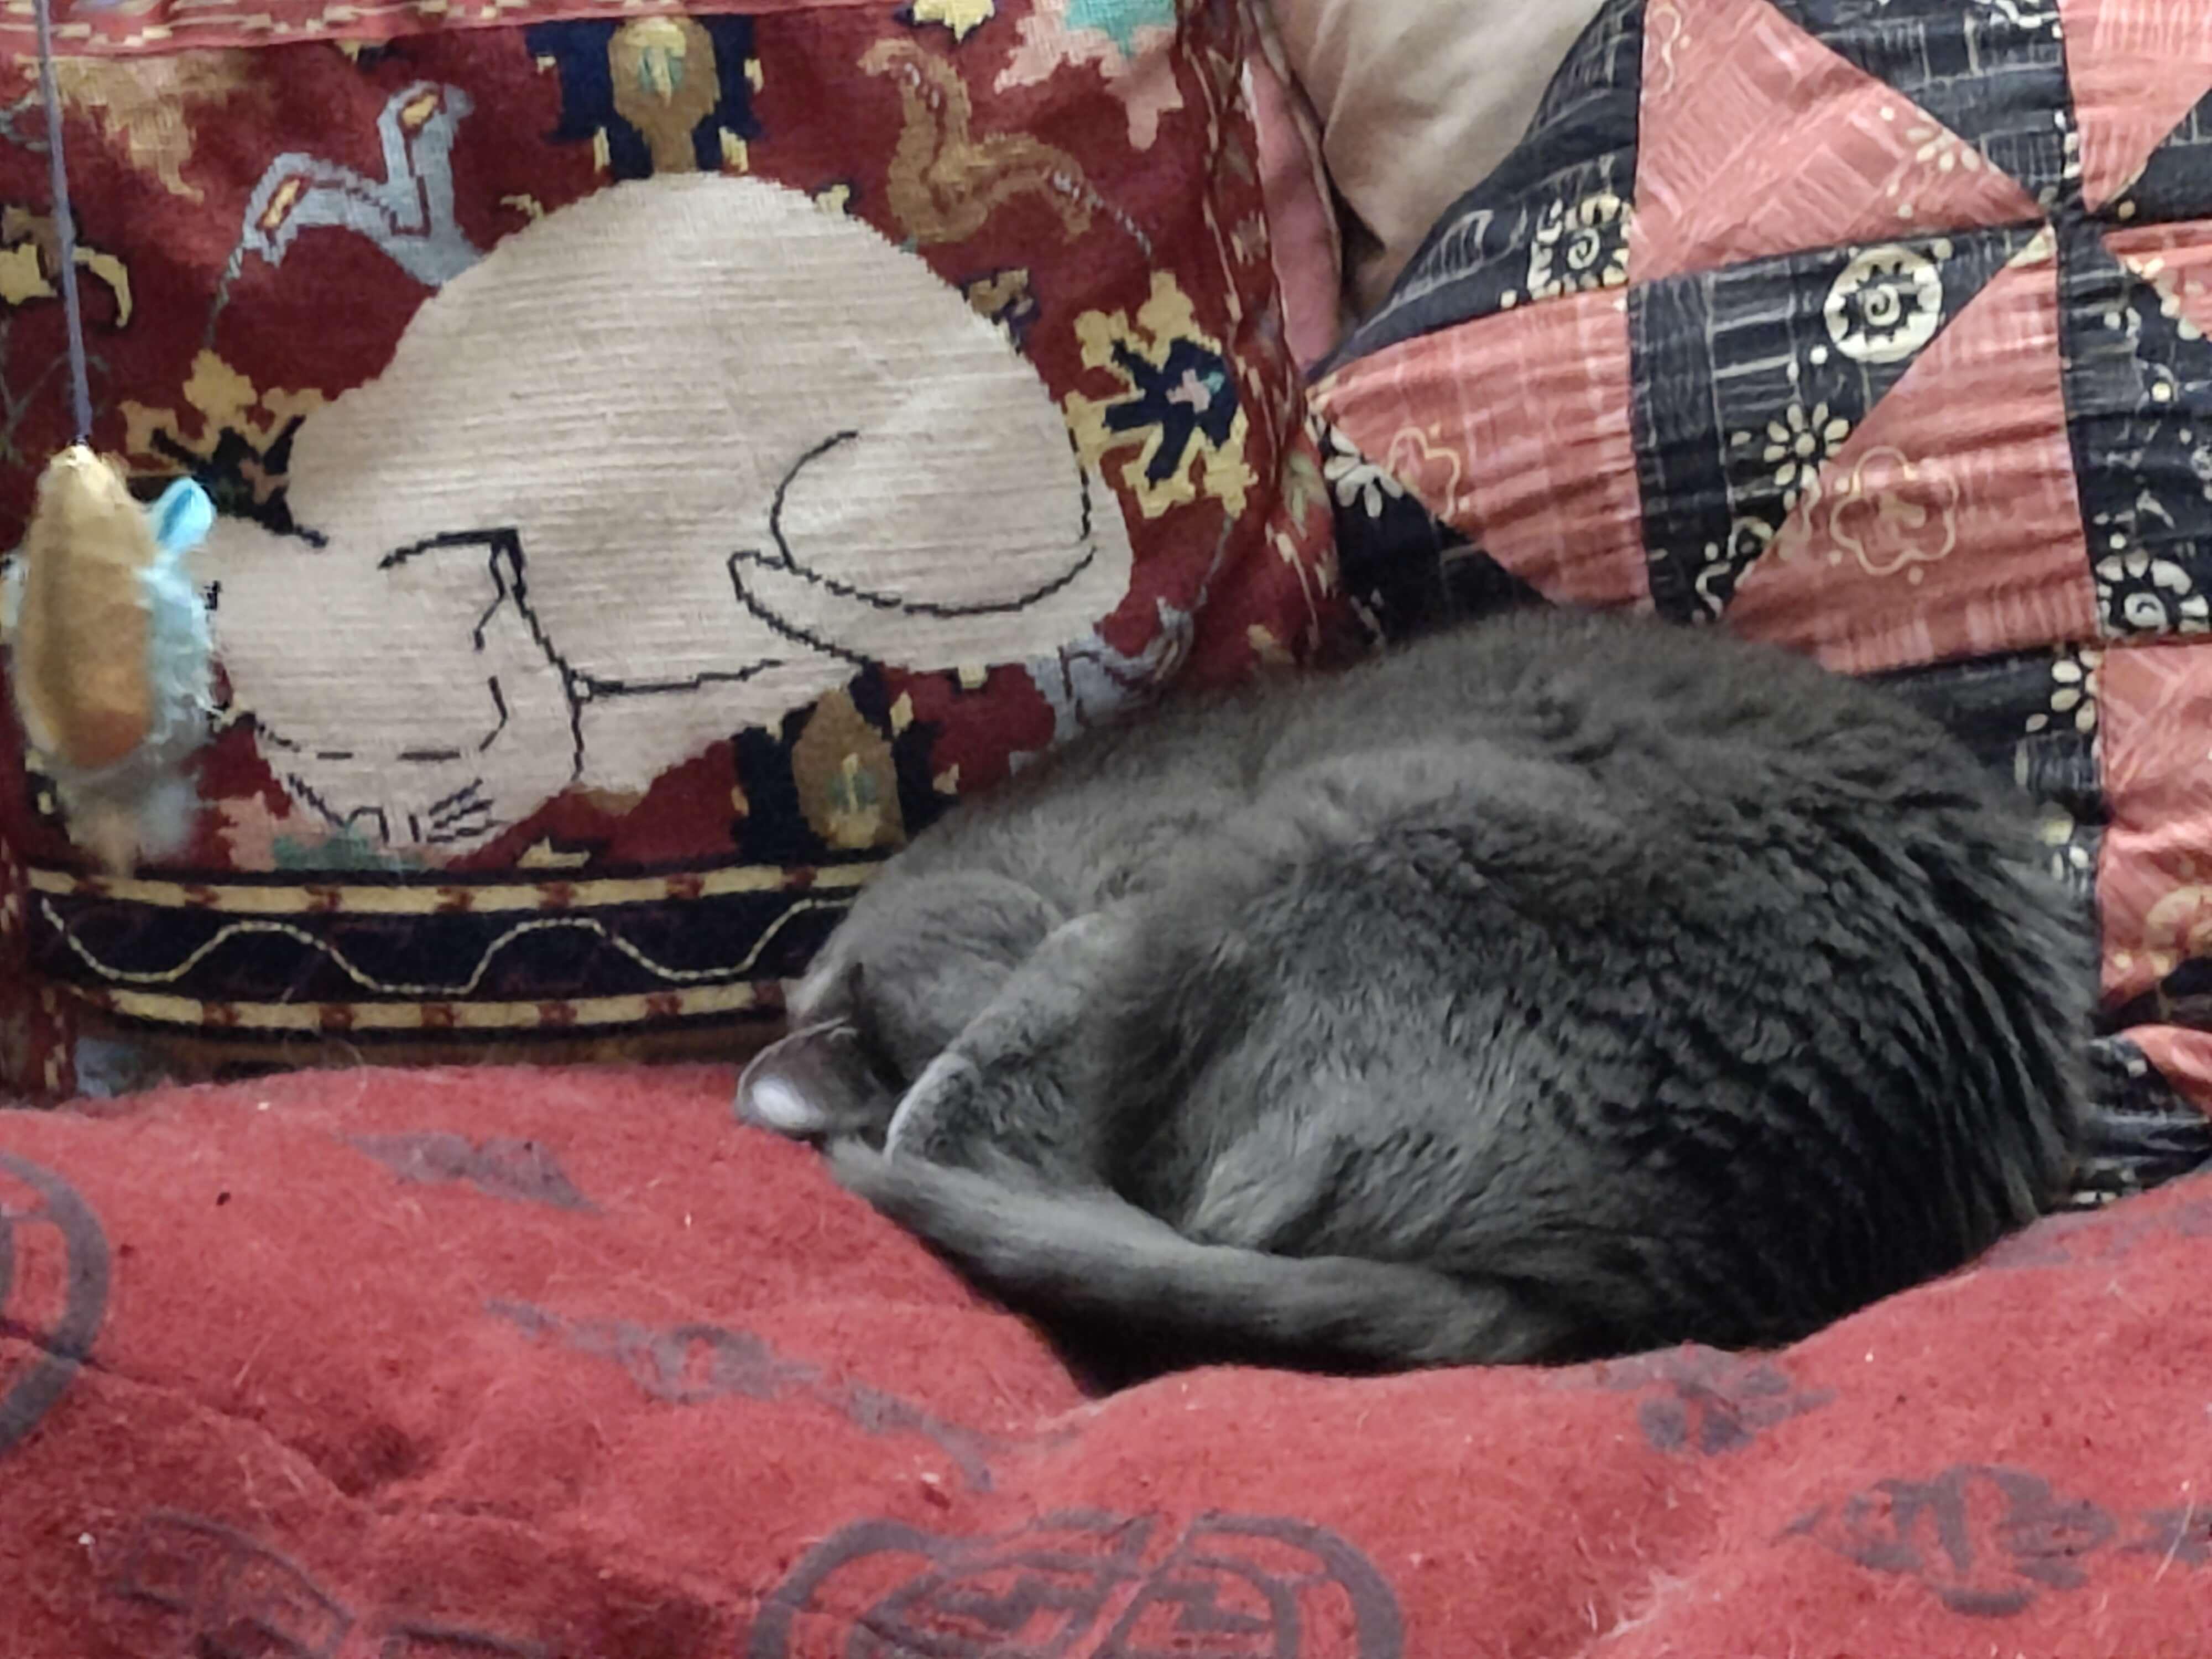 a grey cat sleeps curled up in a circle, next to a needlepoint pillow depicting a white cat curled up asleep